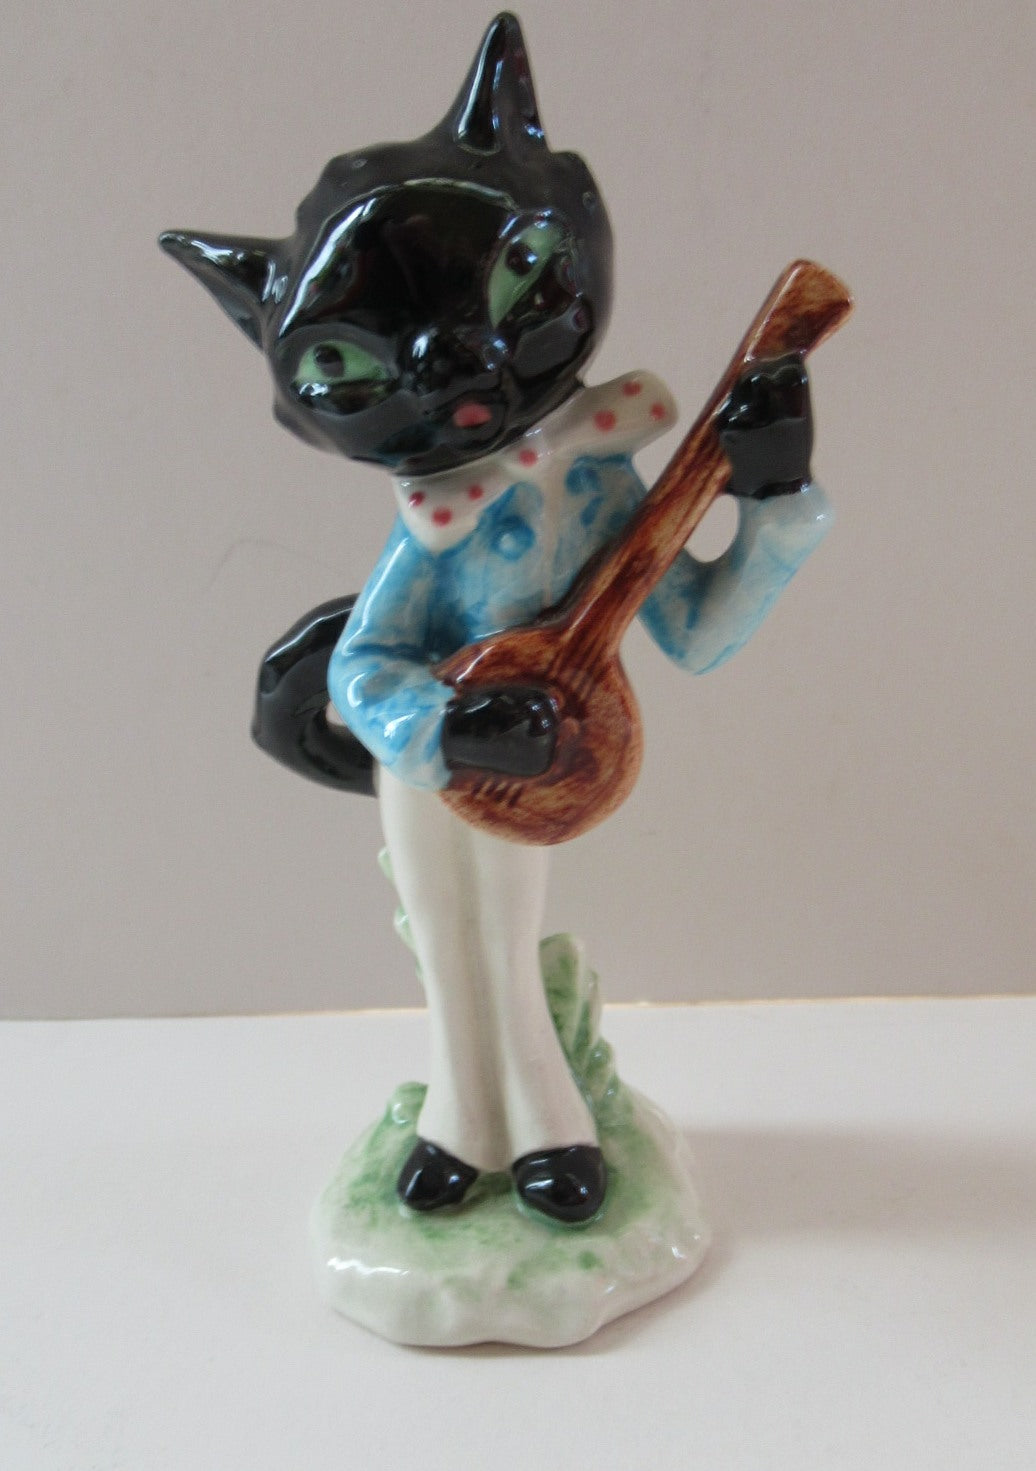 Fabulous & Cute. 1960s Goebel Figurine of a Little Comical Black Cat Playing a Banjo. Designed by Albert Staehle